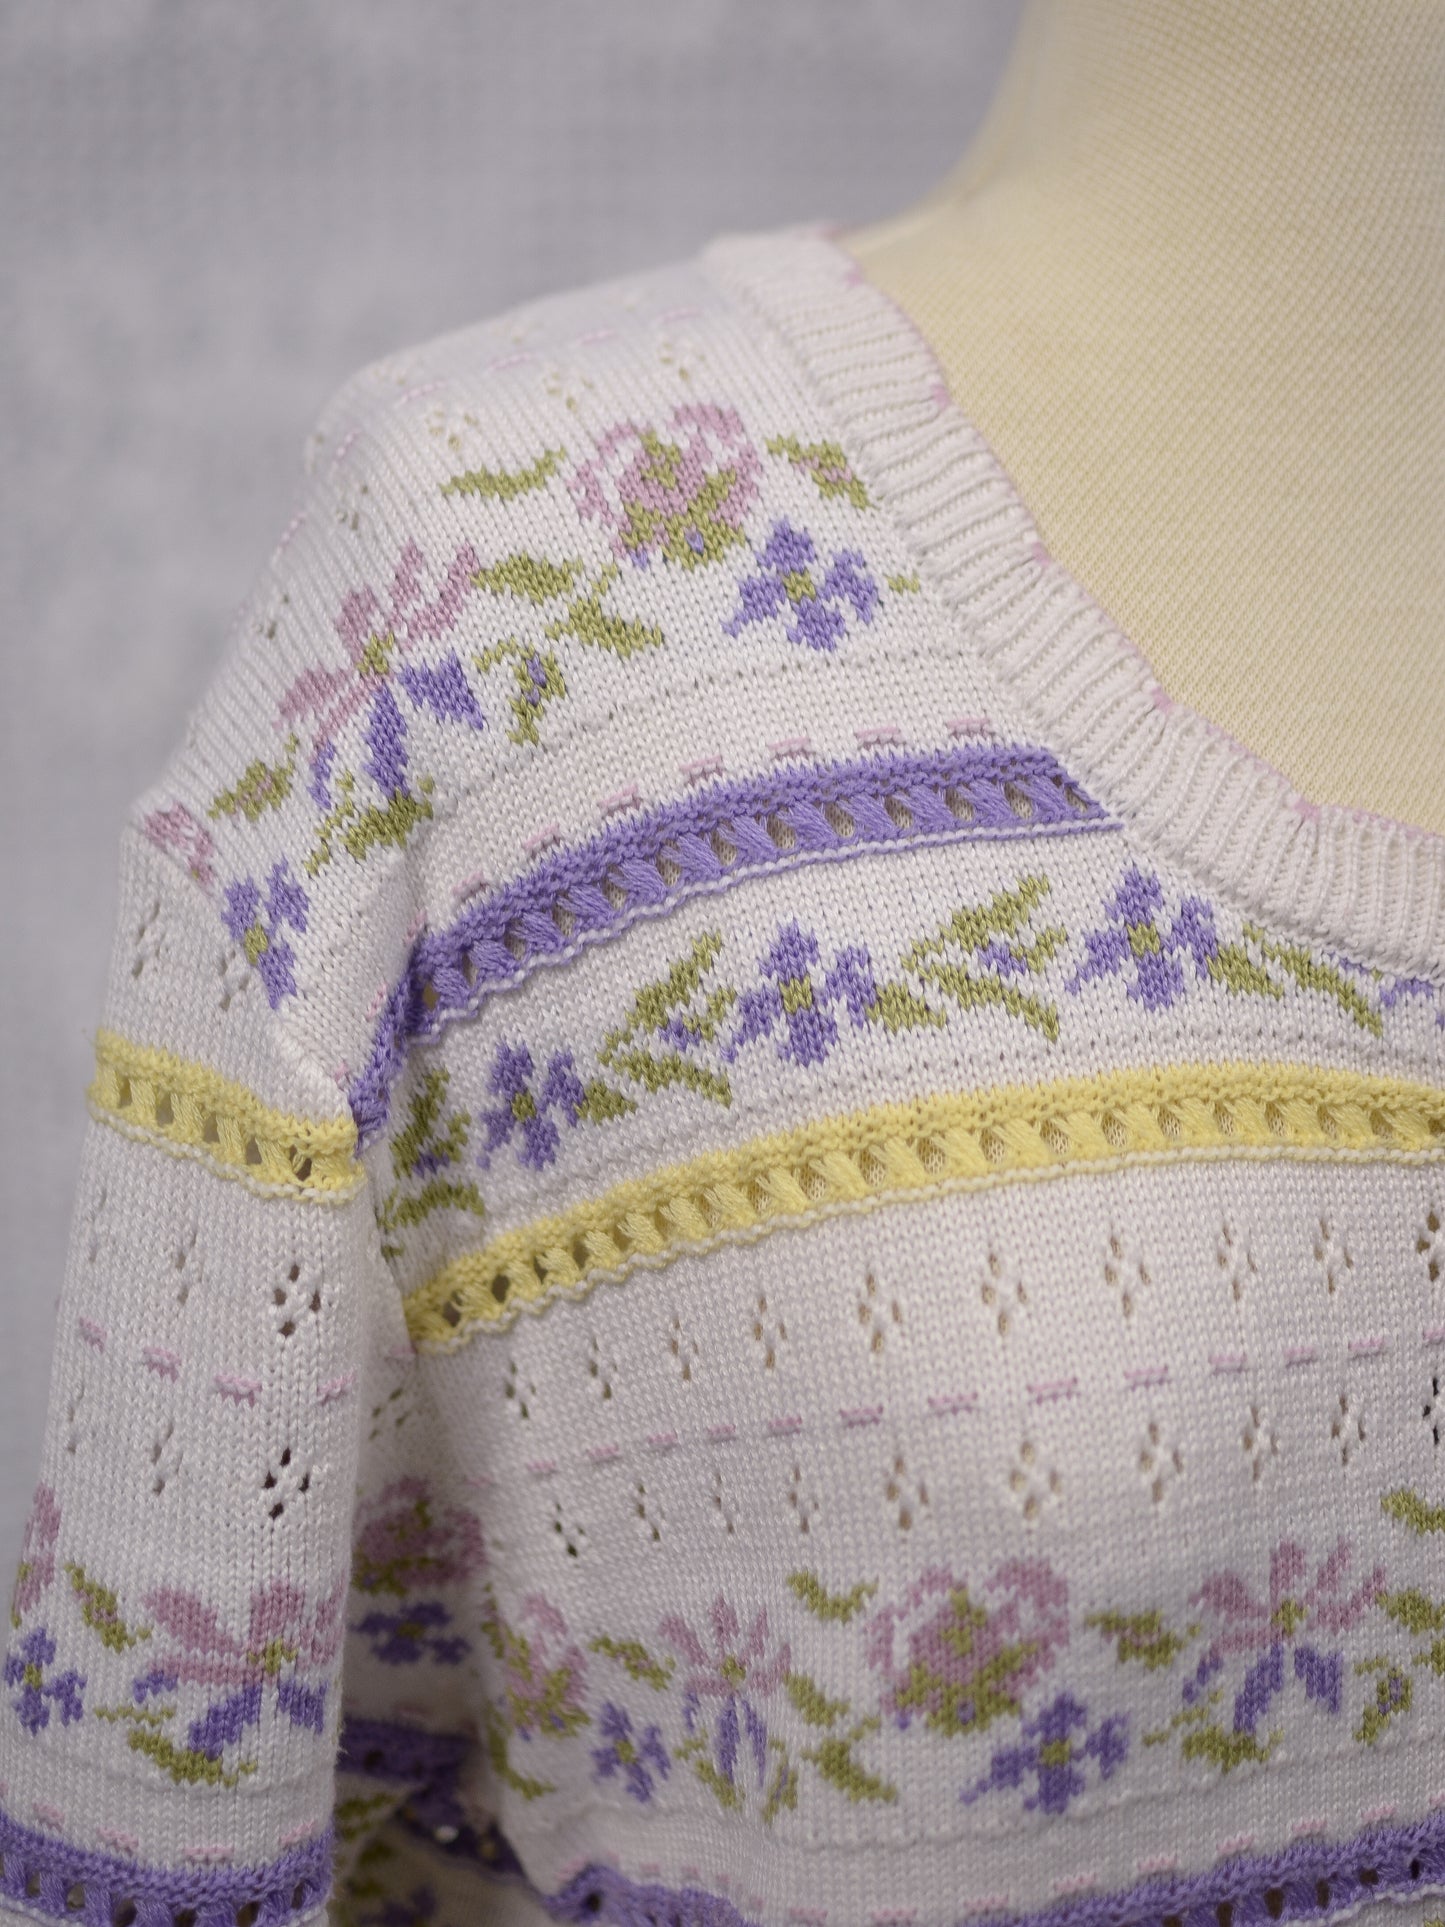 1990s St Michael cream, purple and yellow floral knitted short sleeve cardigan